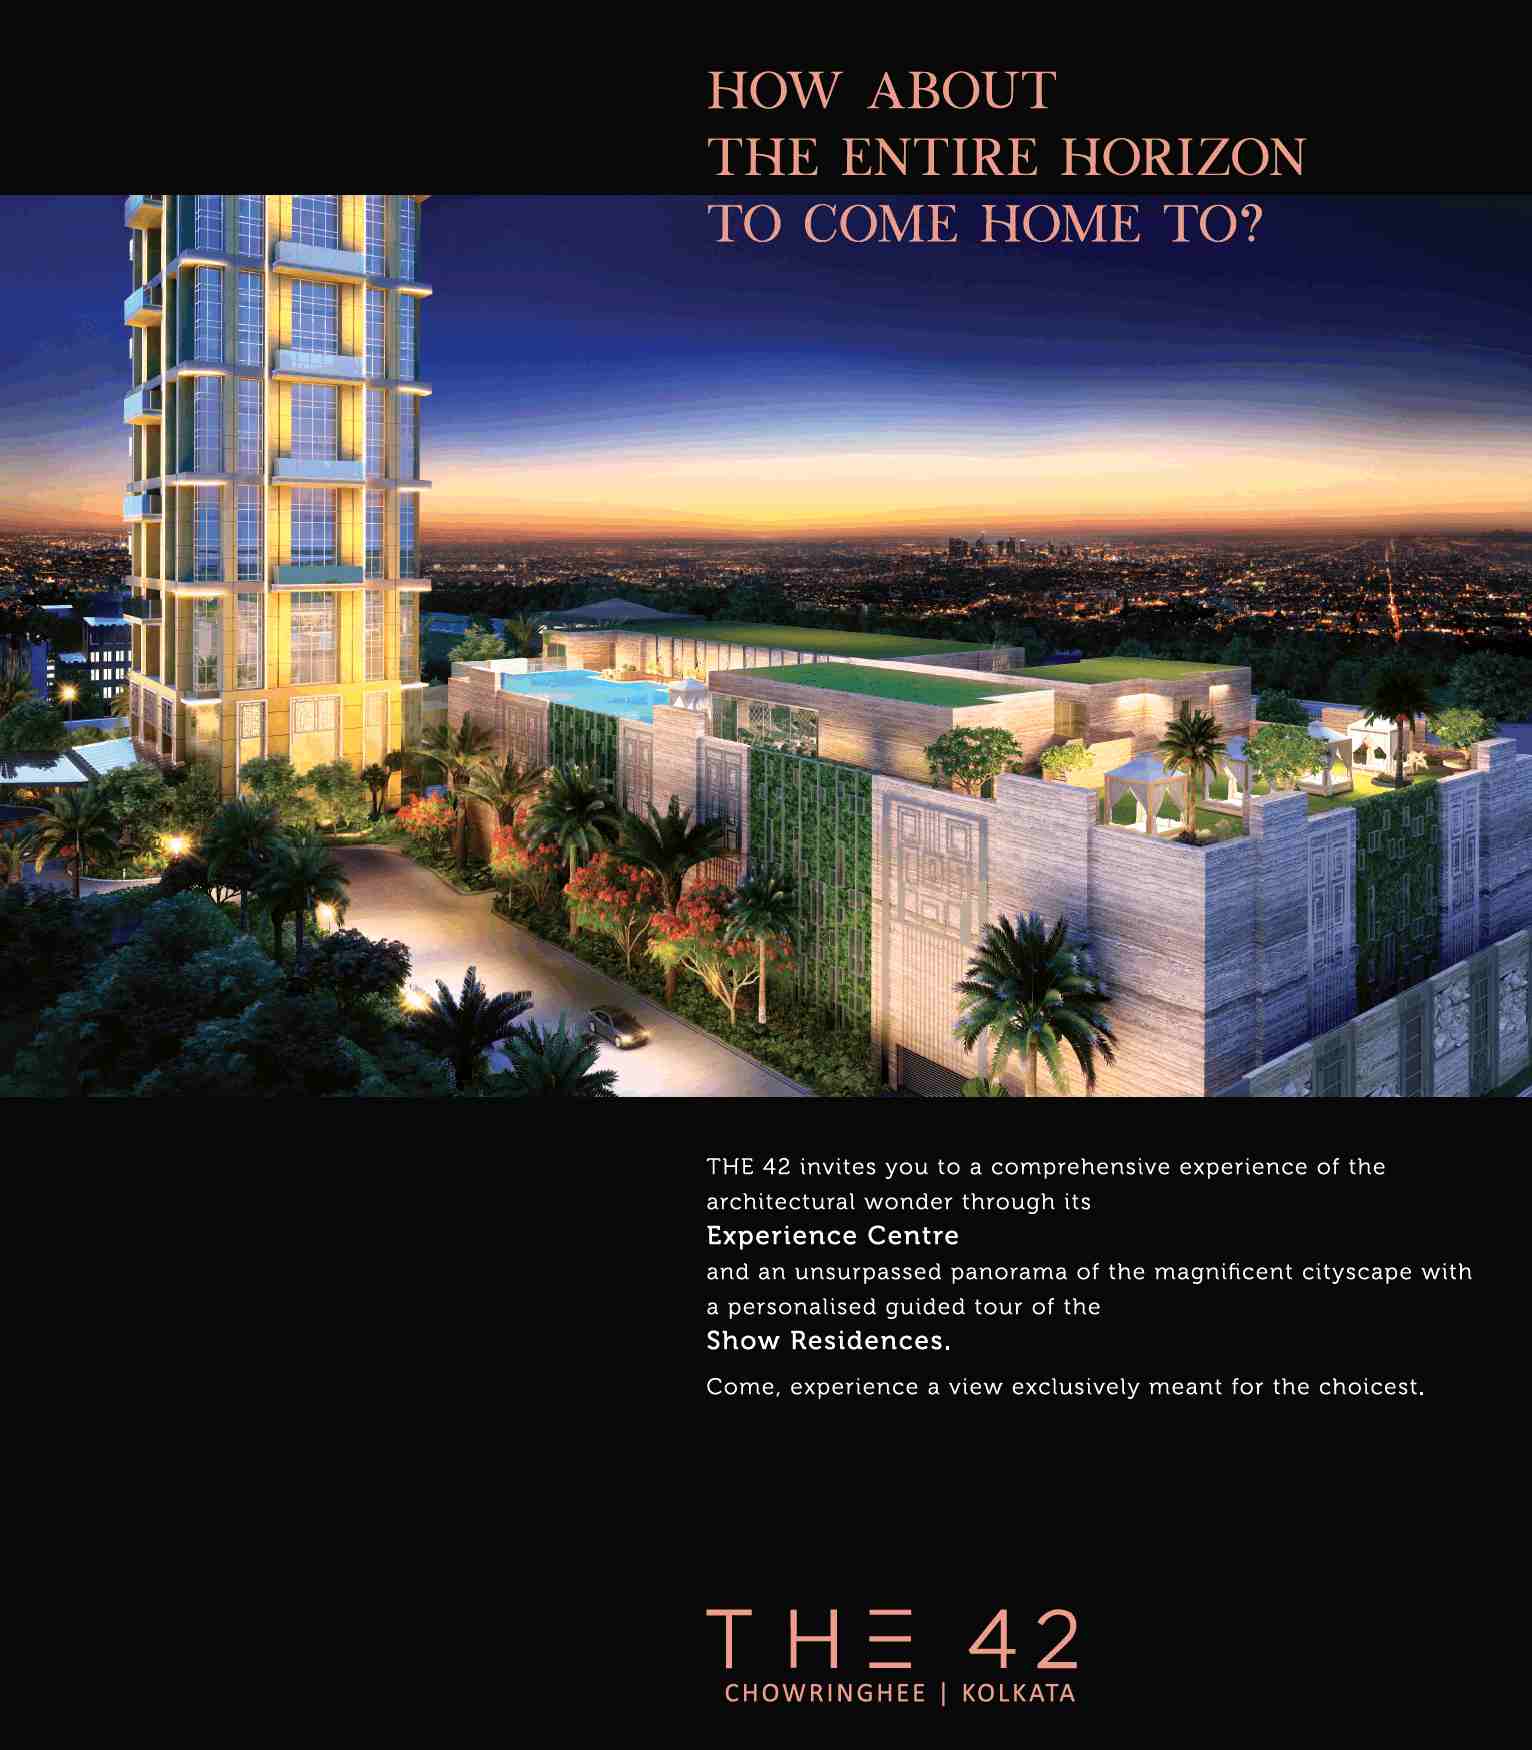 Experience a view exclusively meant for the choicest at Alcove The 42 in Kolkata